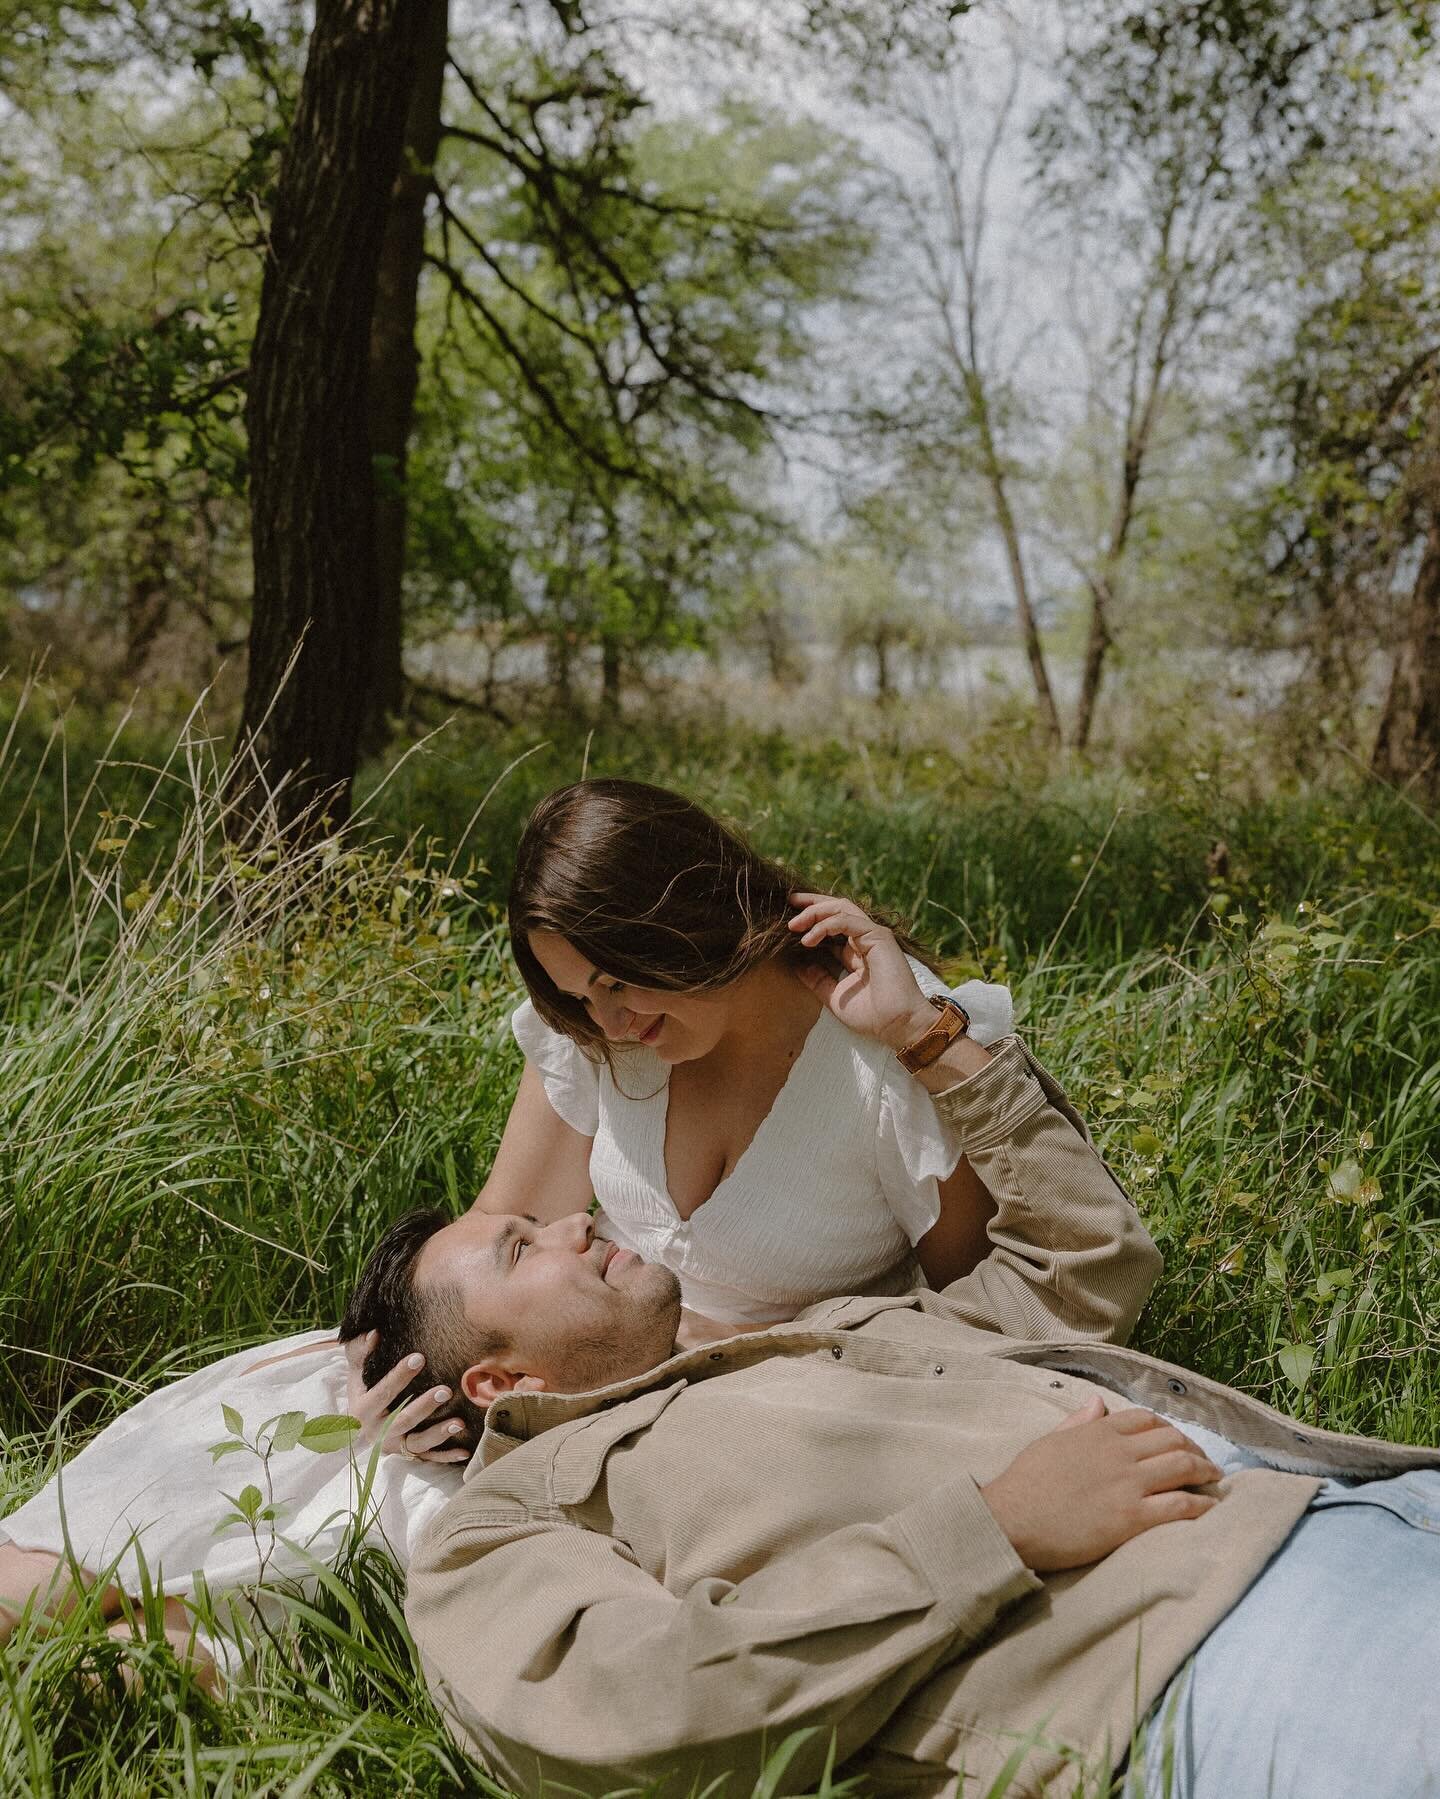 The sweetest (and windiest) afternoon with Emma + Andres!!! 🤍🕊️

🏷:
#mollyrozephotography #texasengagementphotographer #austinengagement #austinengagementphotographer #dallasengagementphotographer #weddingphotographer  #austinwedding  #dallasweddi